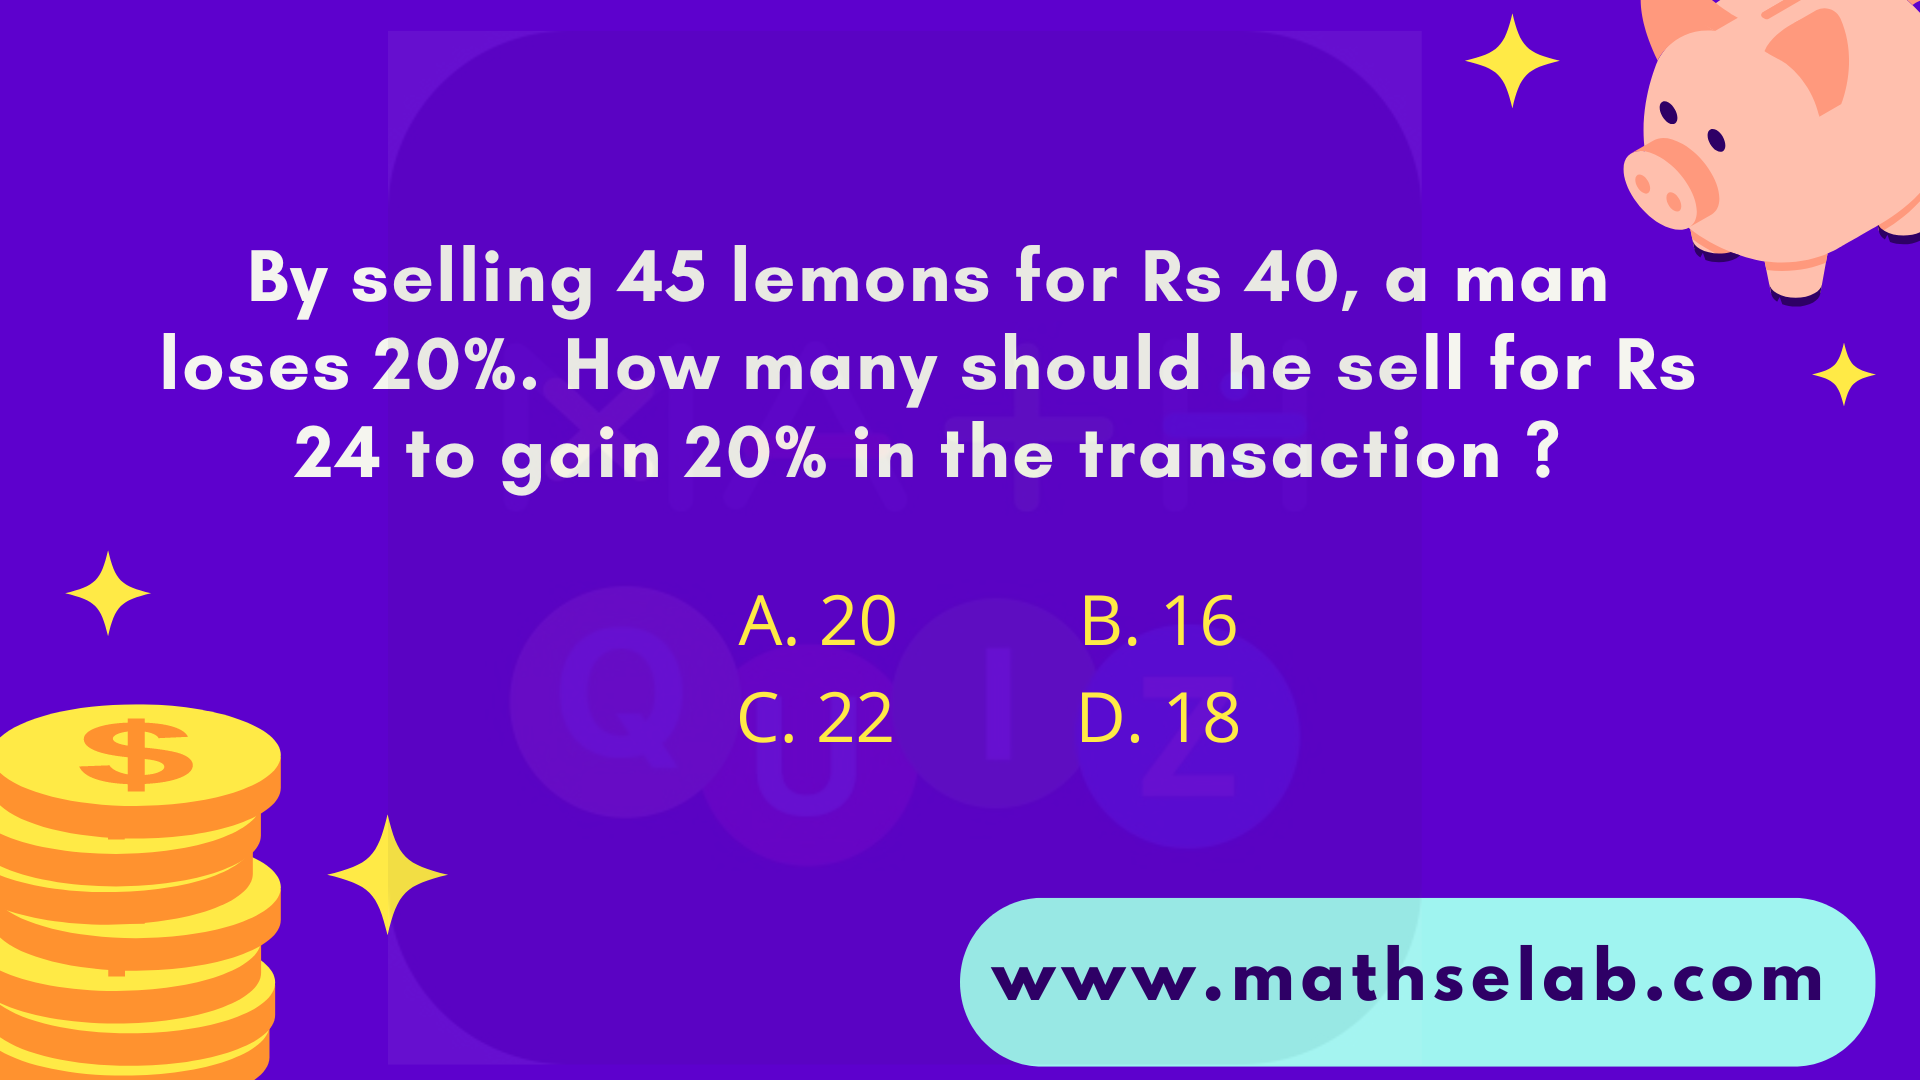 By selling 45 lemons for Rs 40, a man loses 20%. How many should he sell for Rs 24 to gain 20% in the transaction ?